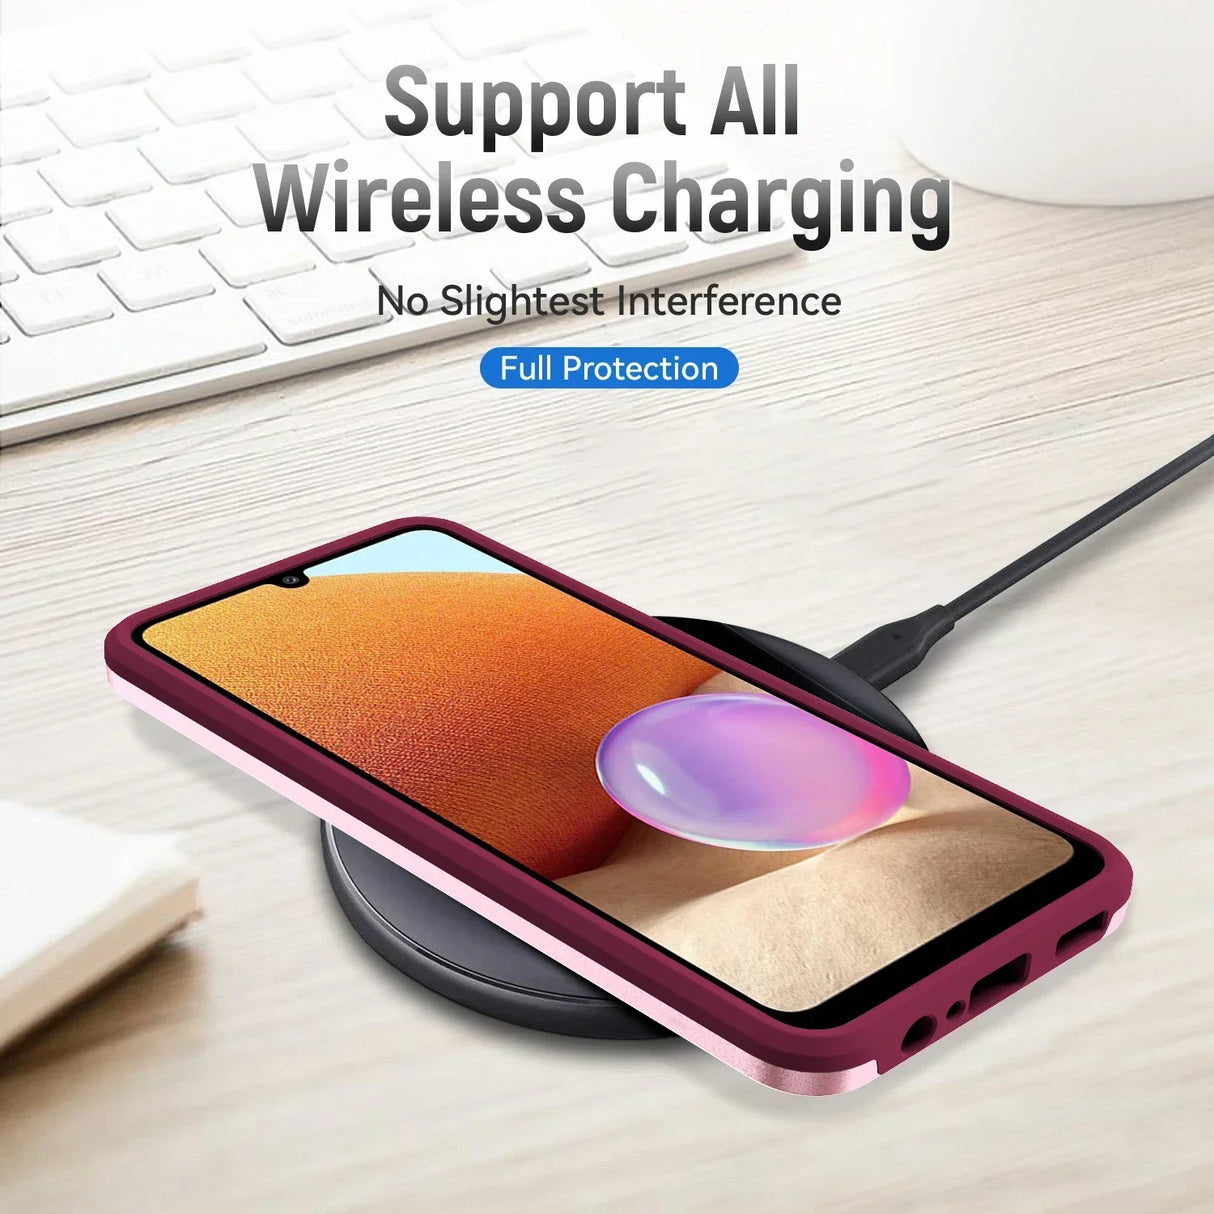 anker wireless wireless charger with a phone and a mouse